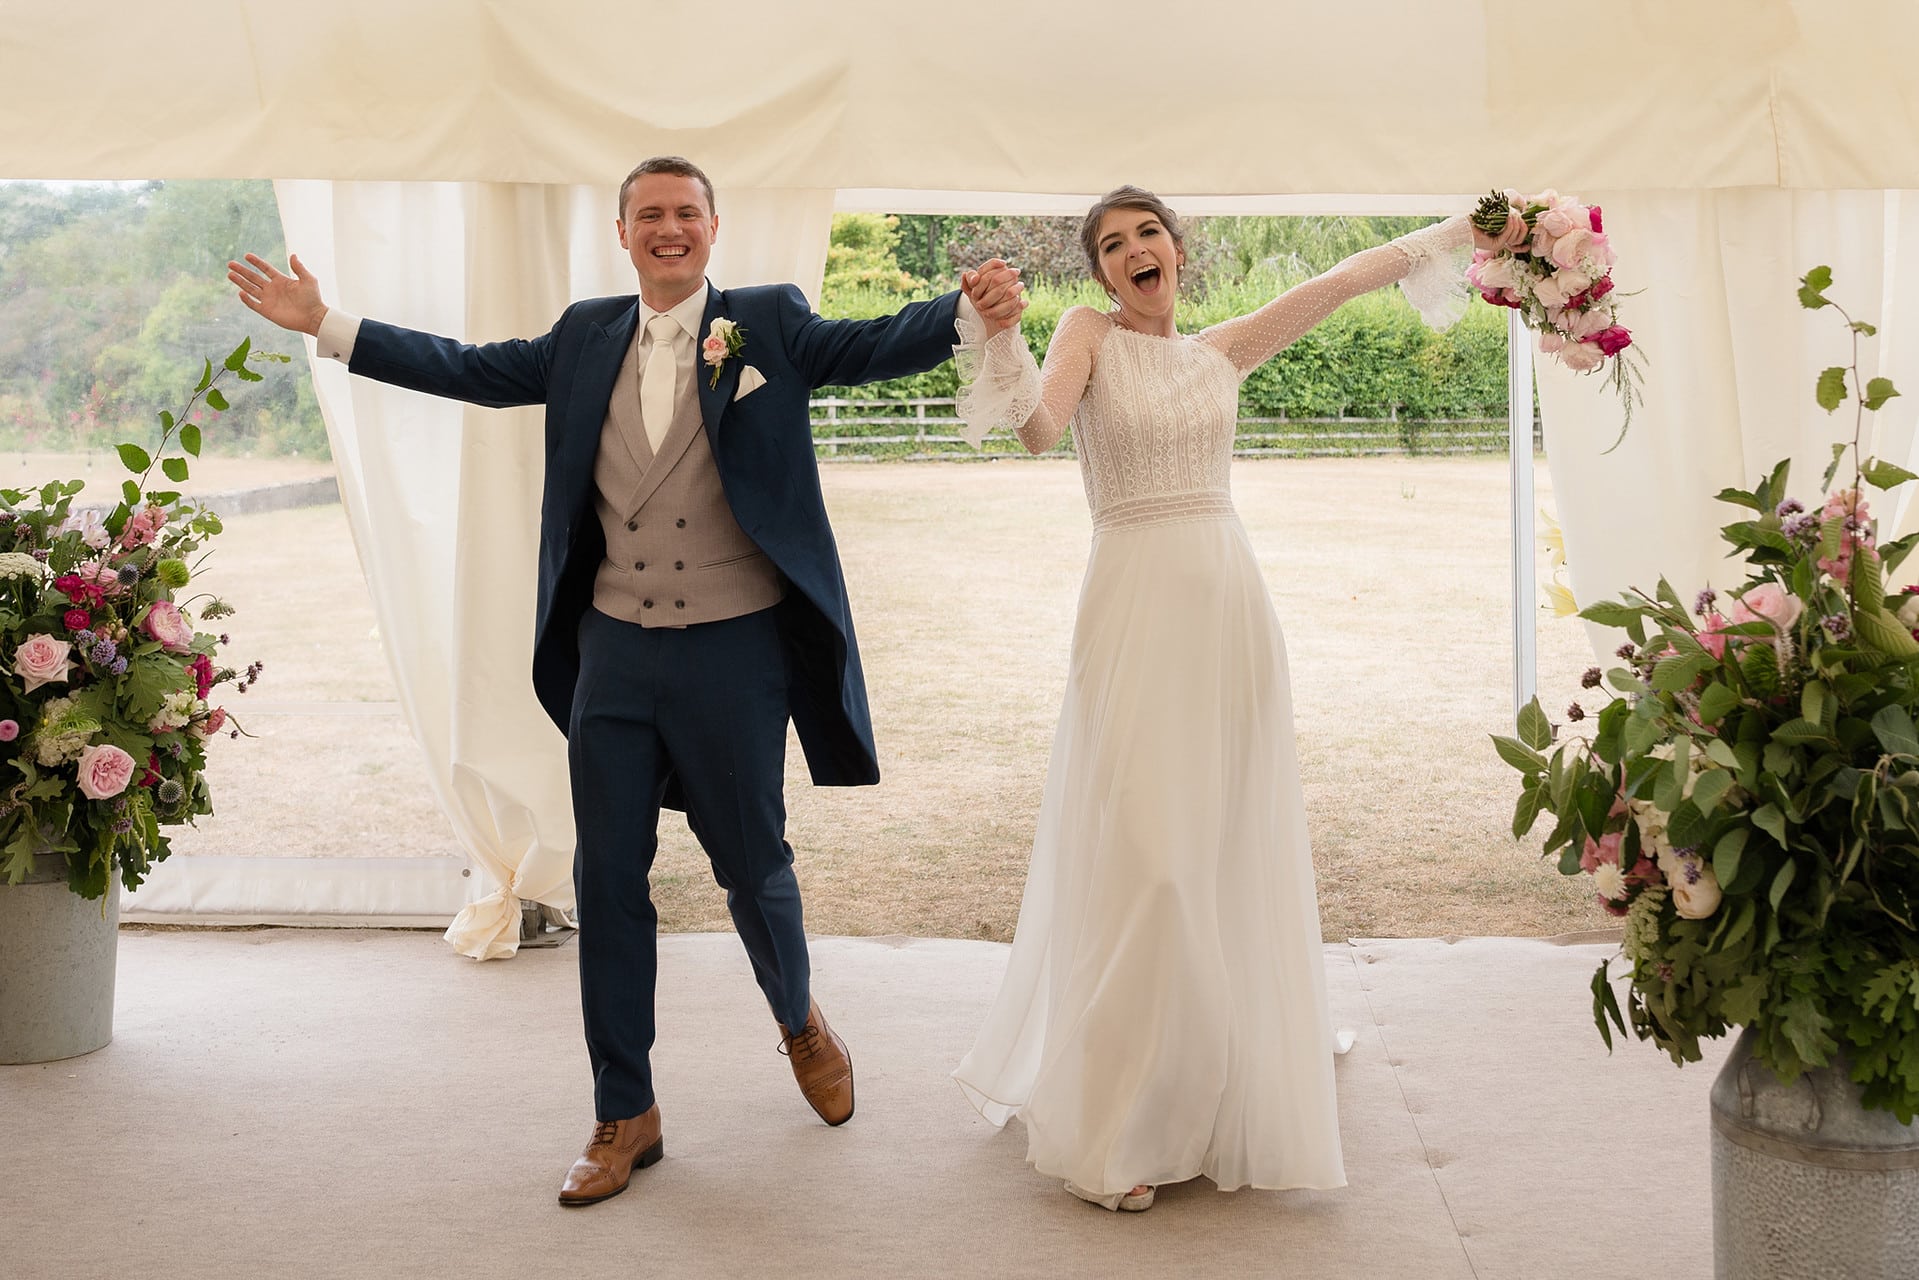 Bride and groom walking into their marquee for the wedding breakfast with their arms outstretched